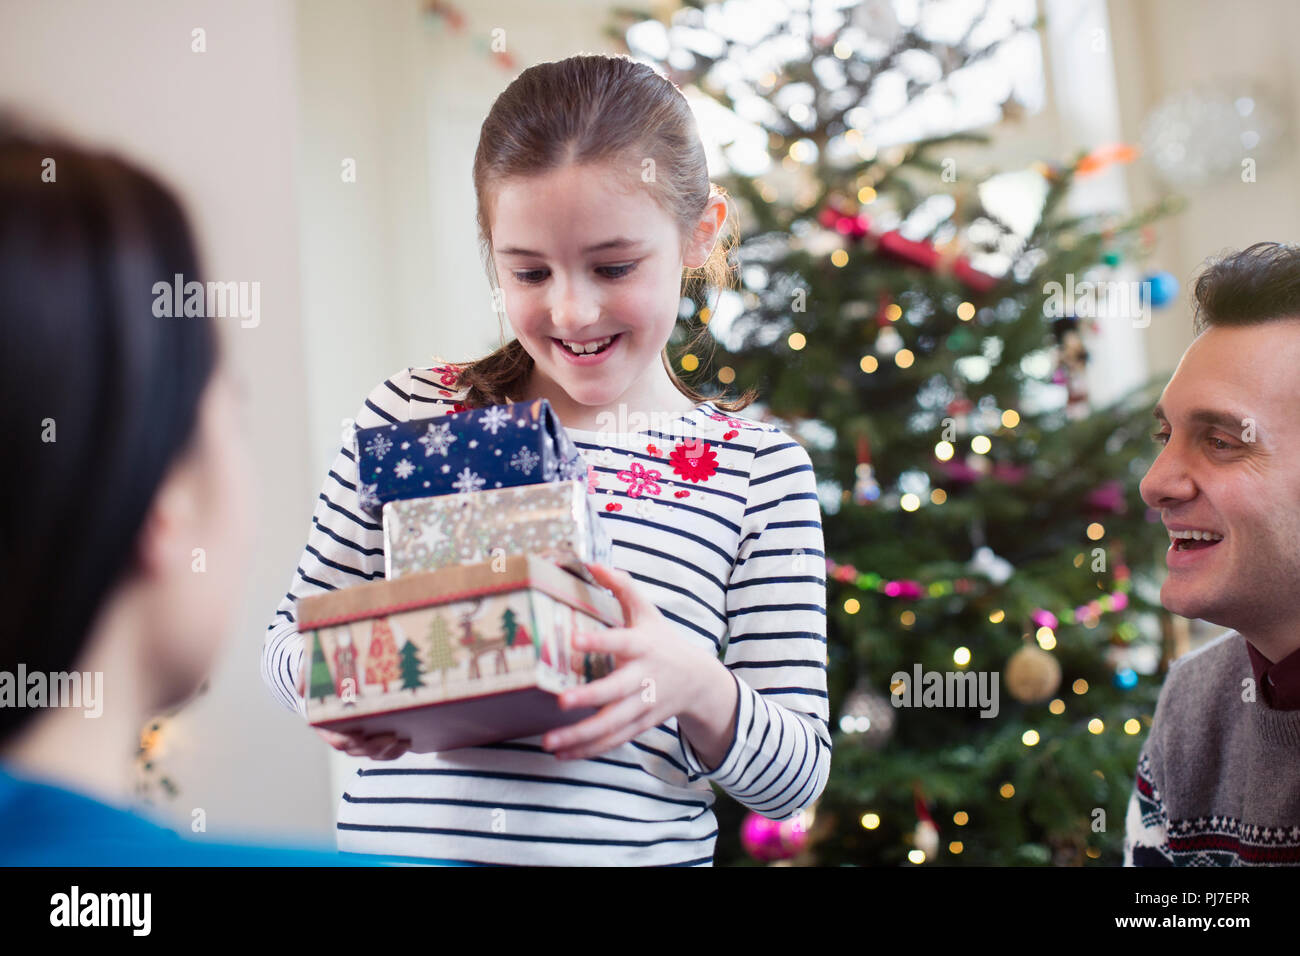 Girl gathering gifts in front of Christmas tree Stock Photo